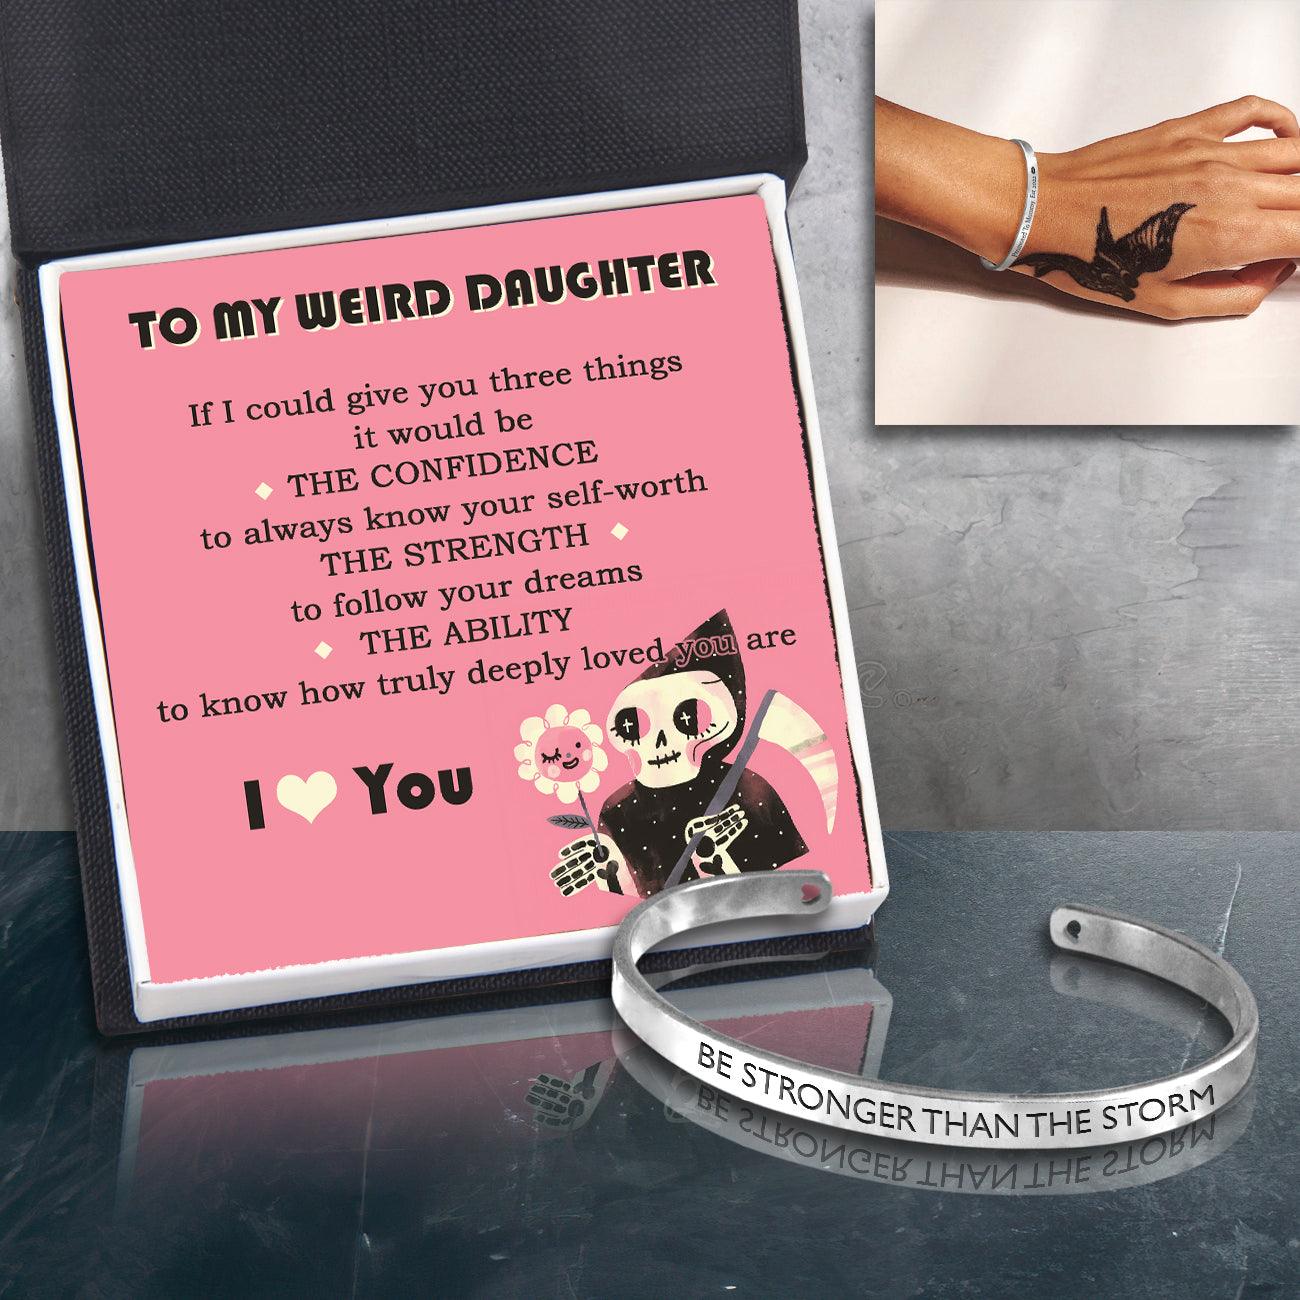 Skull Bracelet - Skull - To My Weird Daughter - How Truly Deeply Loved You Are - Augbzf17013 - Gifts Holder